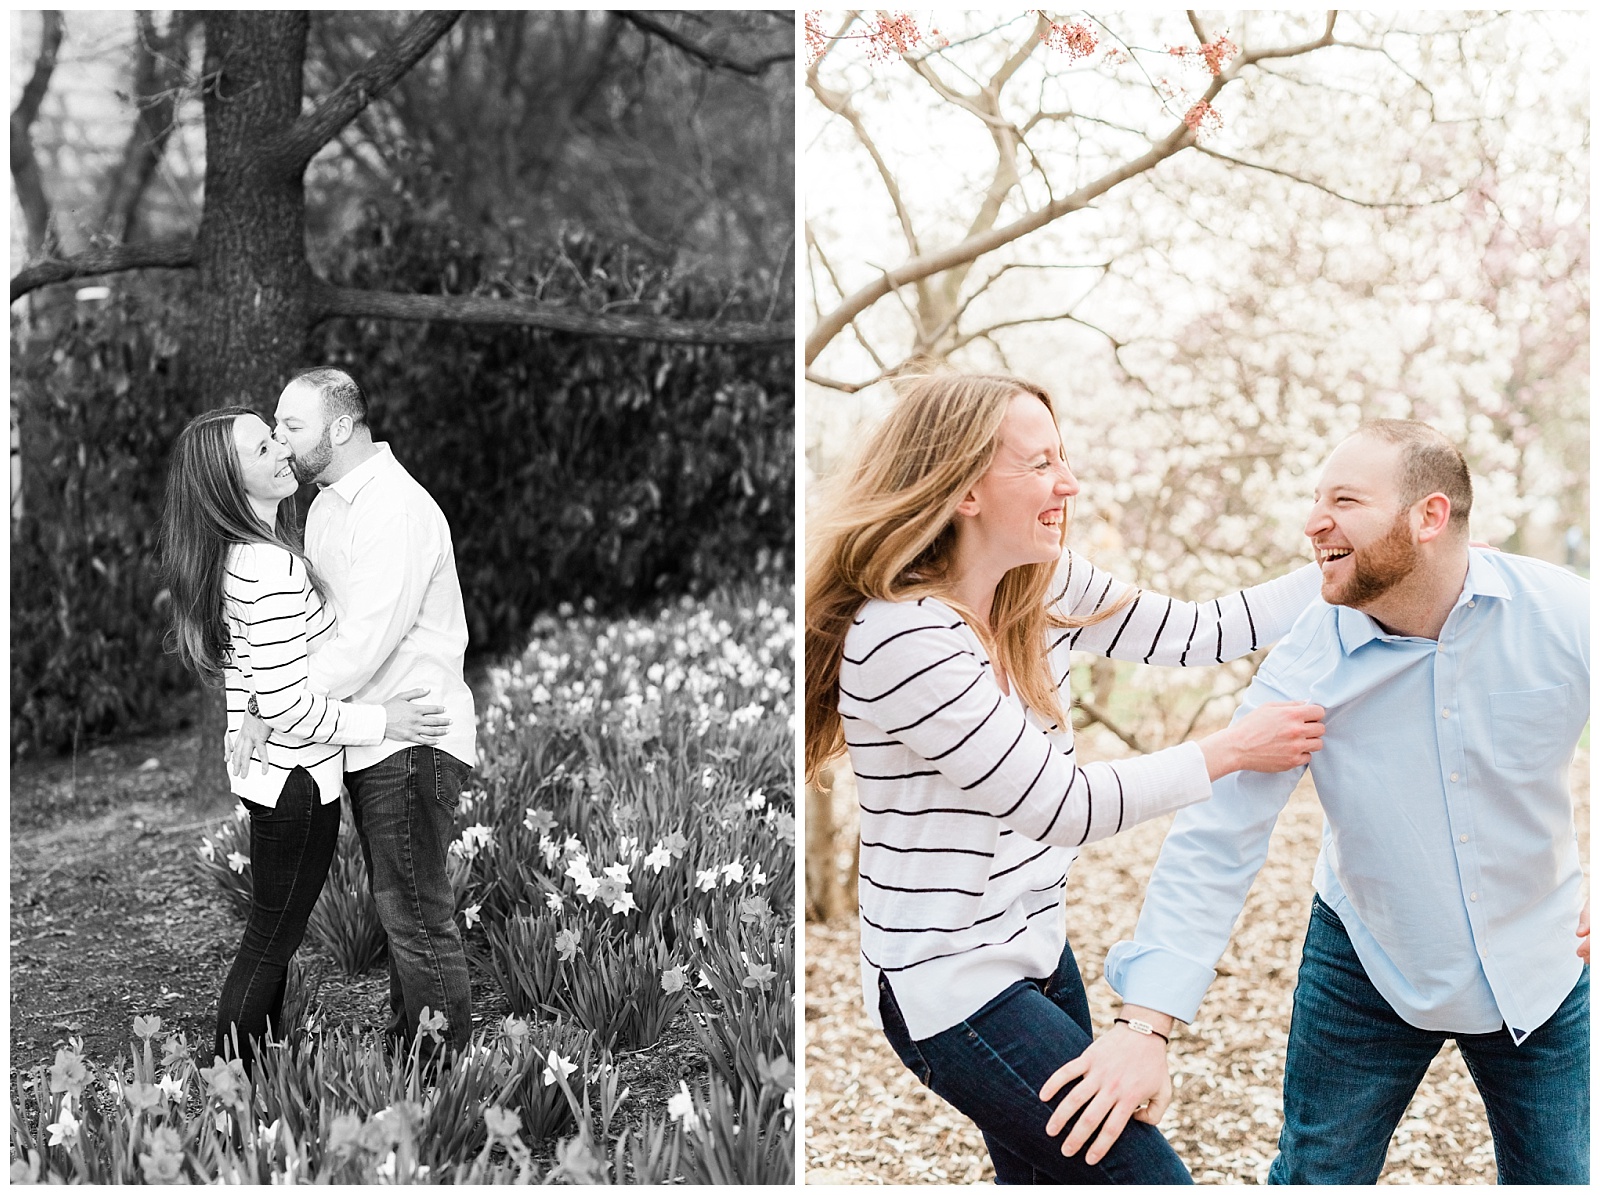 Central Park, NYC engagement session, springtime, wedding photographer, New York, laughter